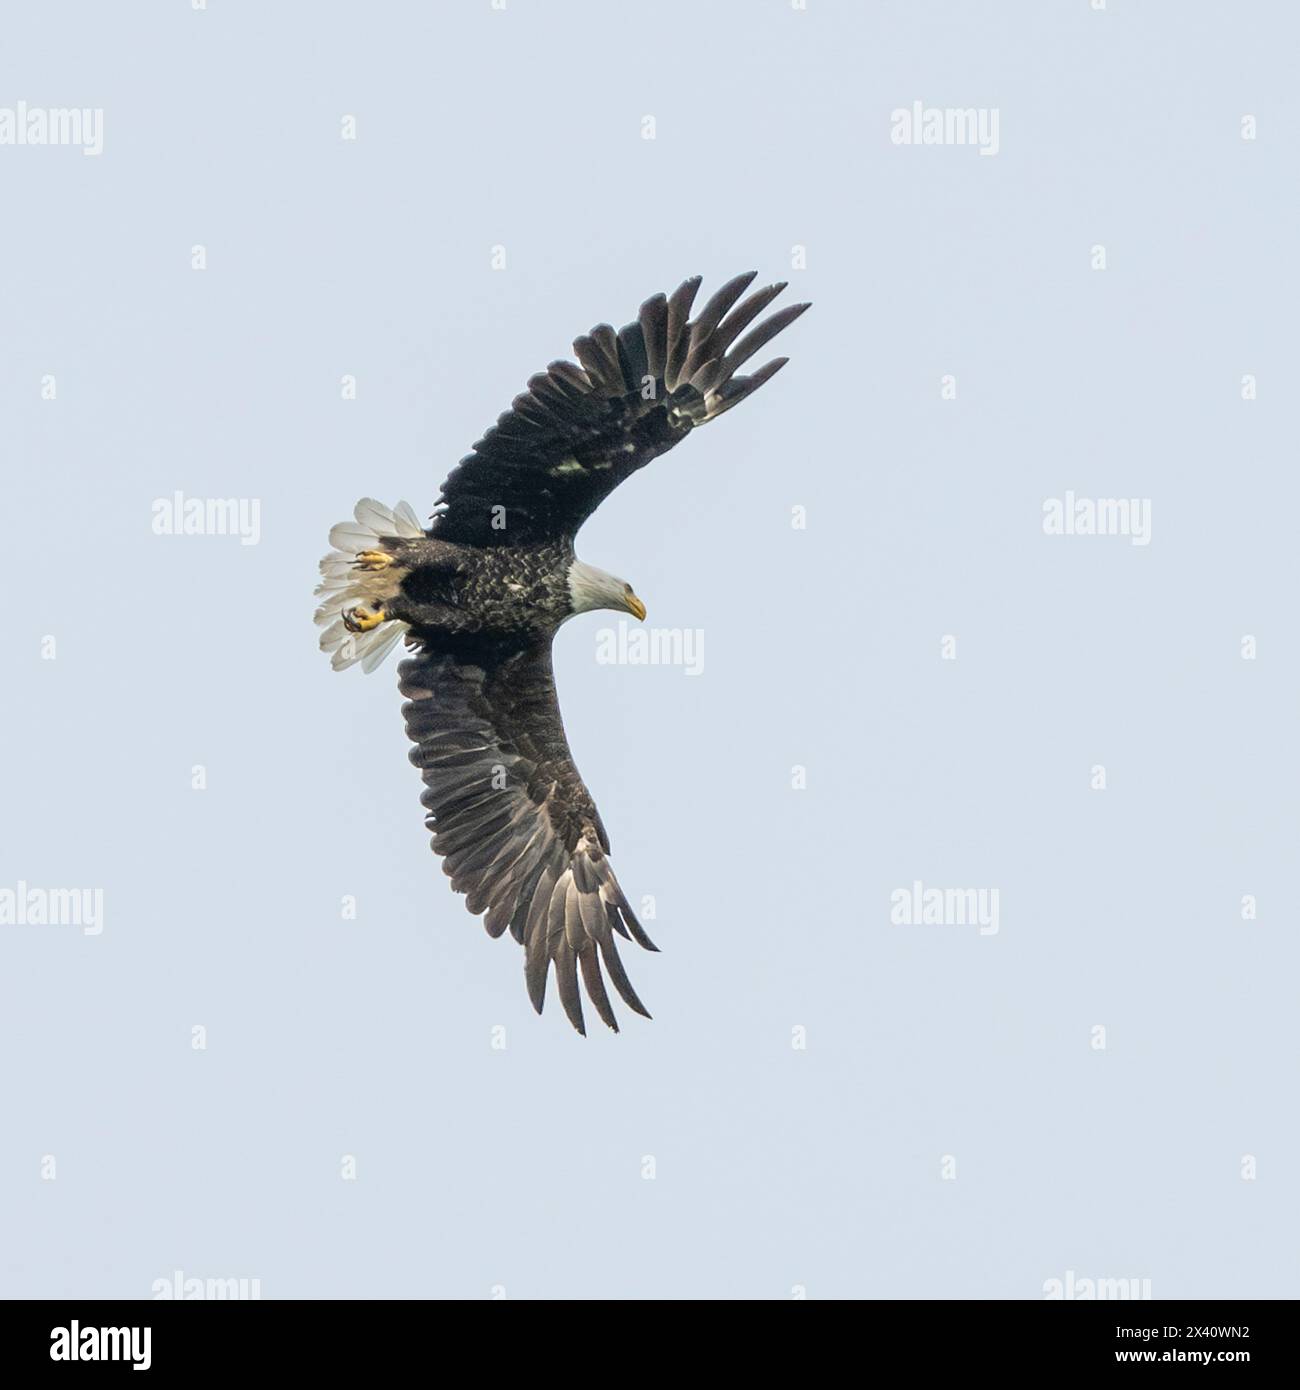 View from directly below of a Bald eagle (Haliaeetus leucocephalus) with a wide wingspan while in flight in a blue sky Stock Photo